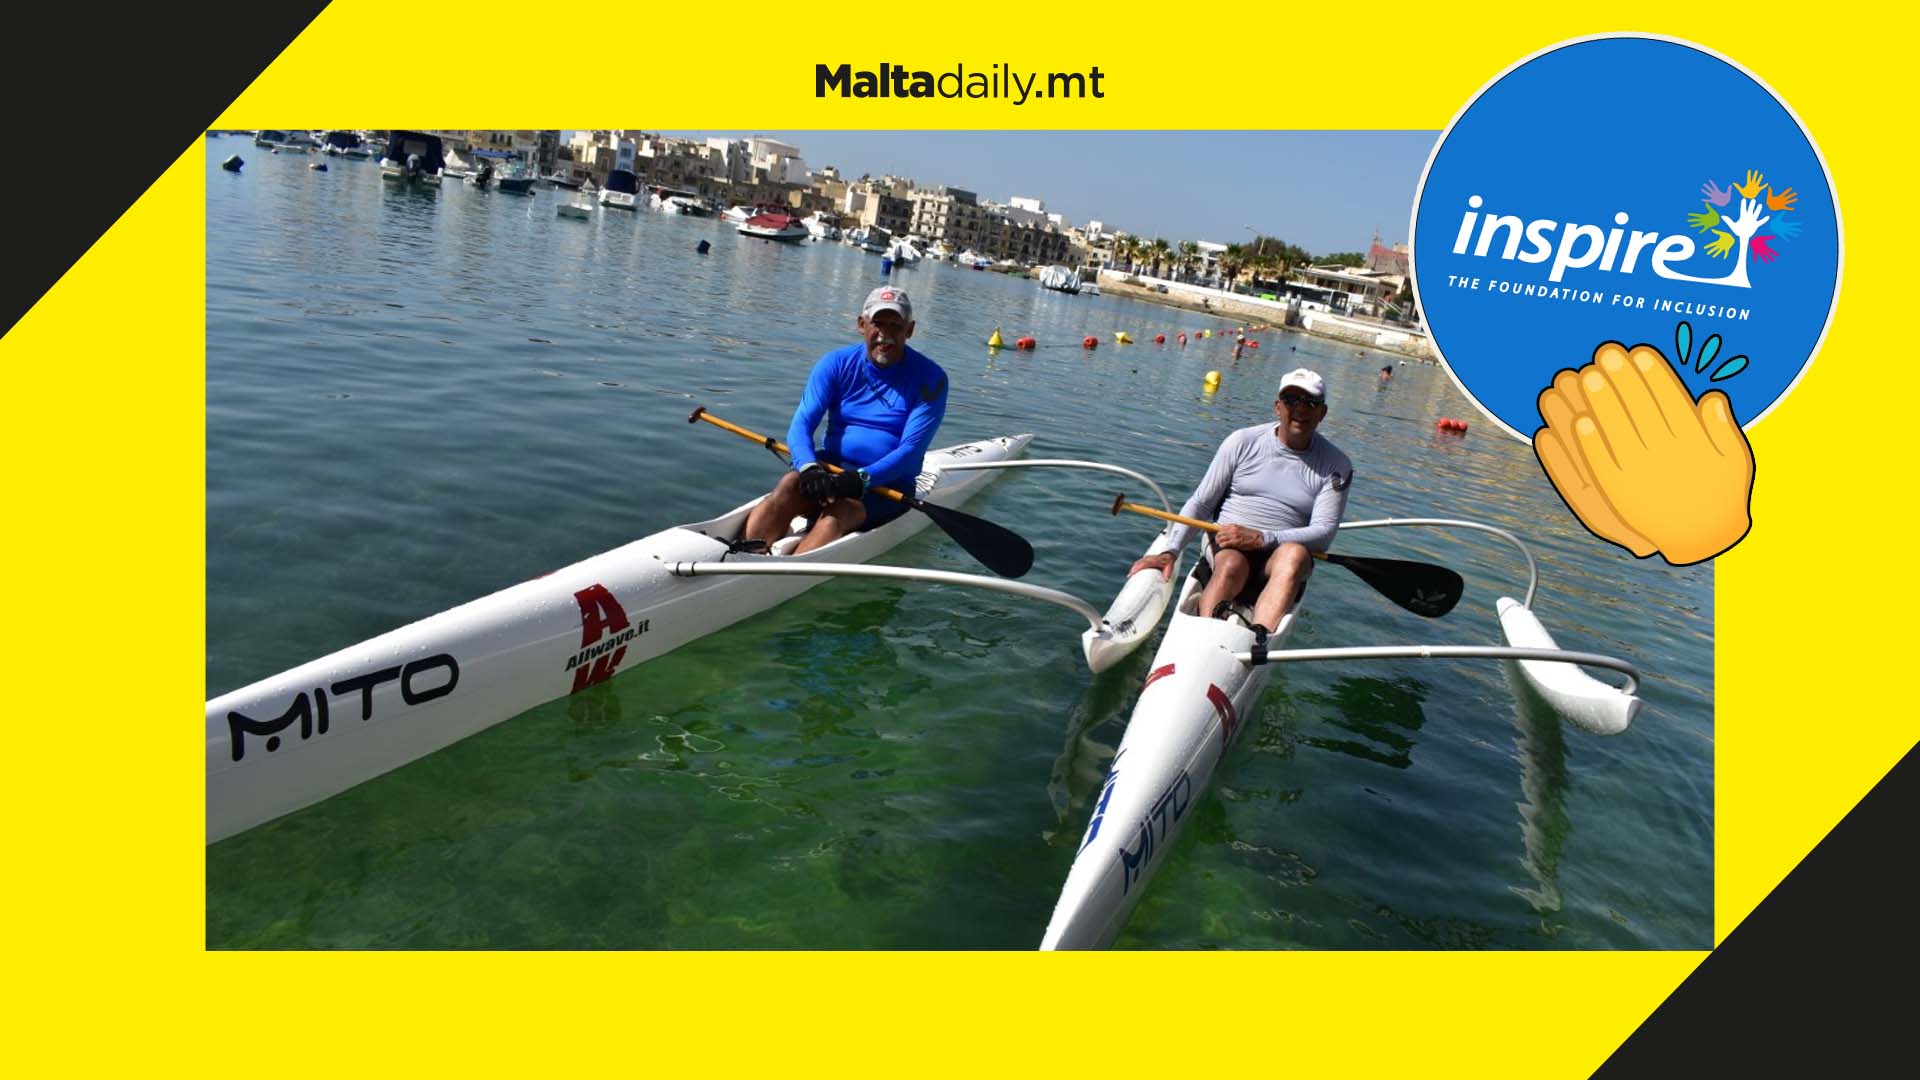 Kayak for Charity take on a new challenge aimed to break their own fundraising record for Inspire Malta